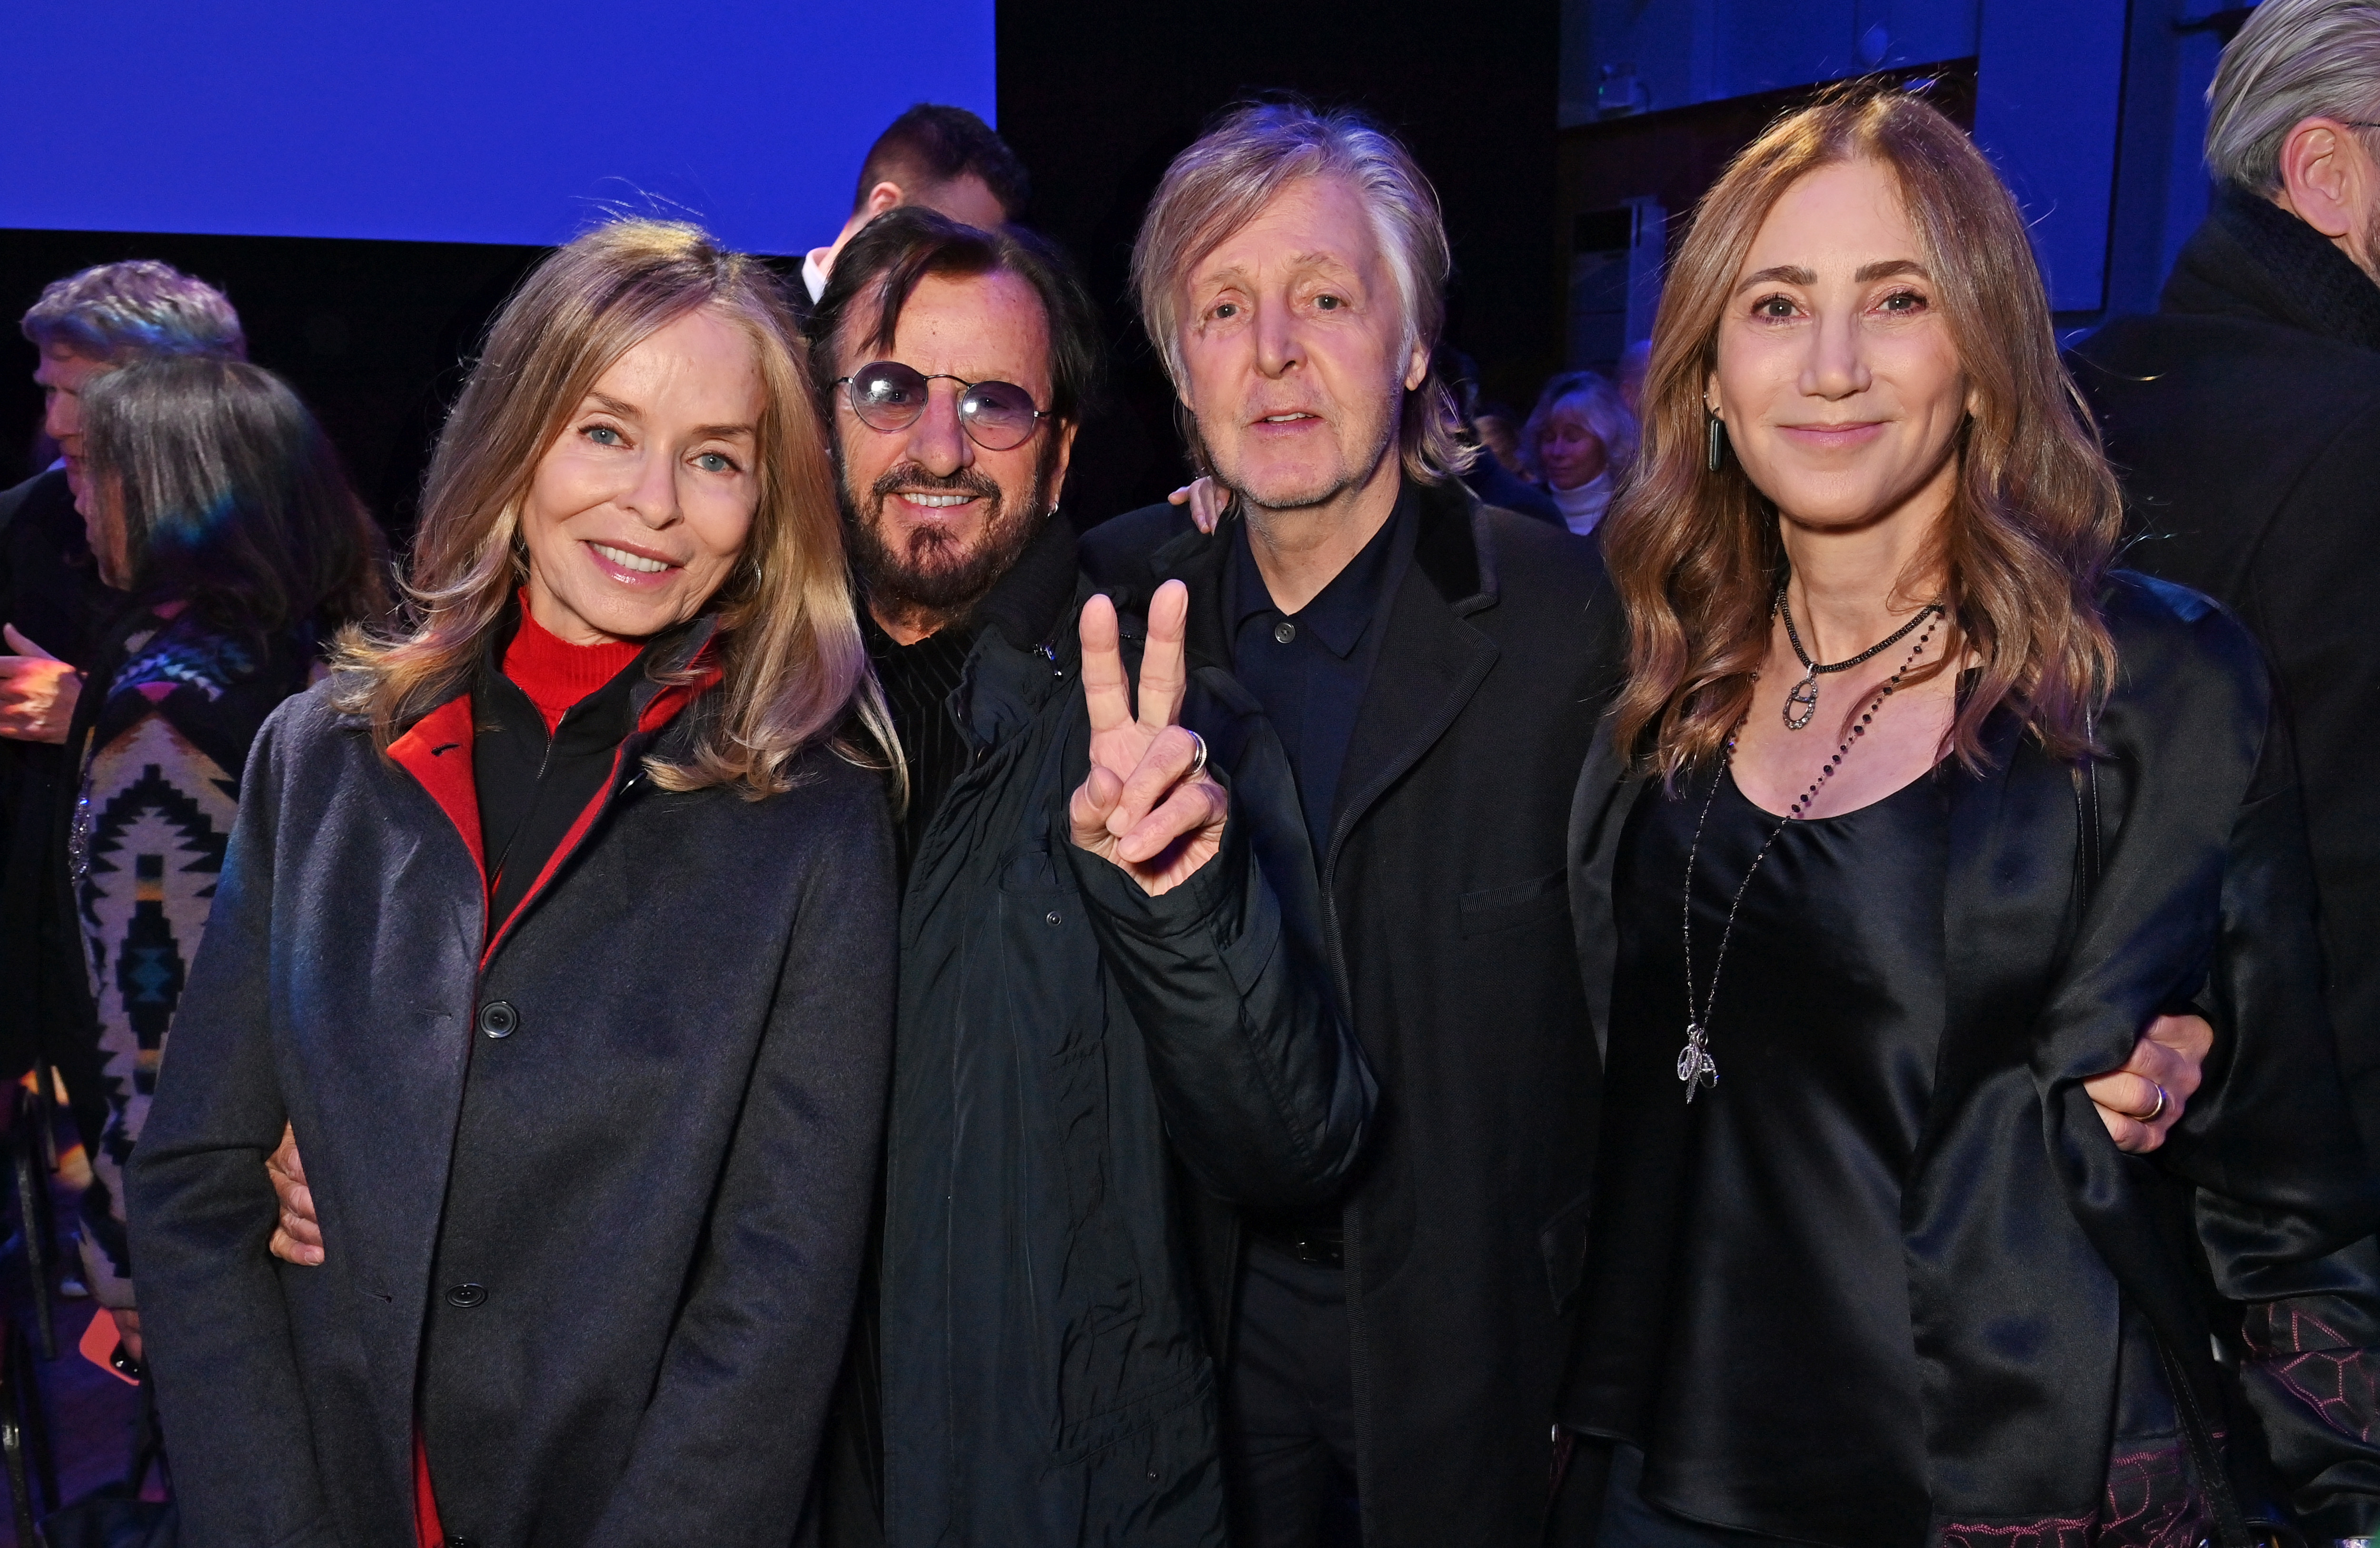 (L to R) Barbara Bach, Sir Ringo Starr, Sir Paul McCartney and Nancy Shevell attend the Disney Original Documentary's "If These Walls Could Sing" London Premiere at Abbey Road Studios, on December 12, 2022, in London, England. | Source: Getty Images